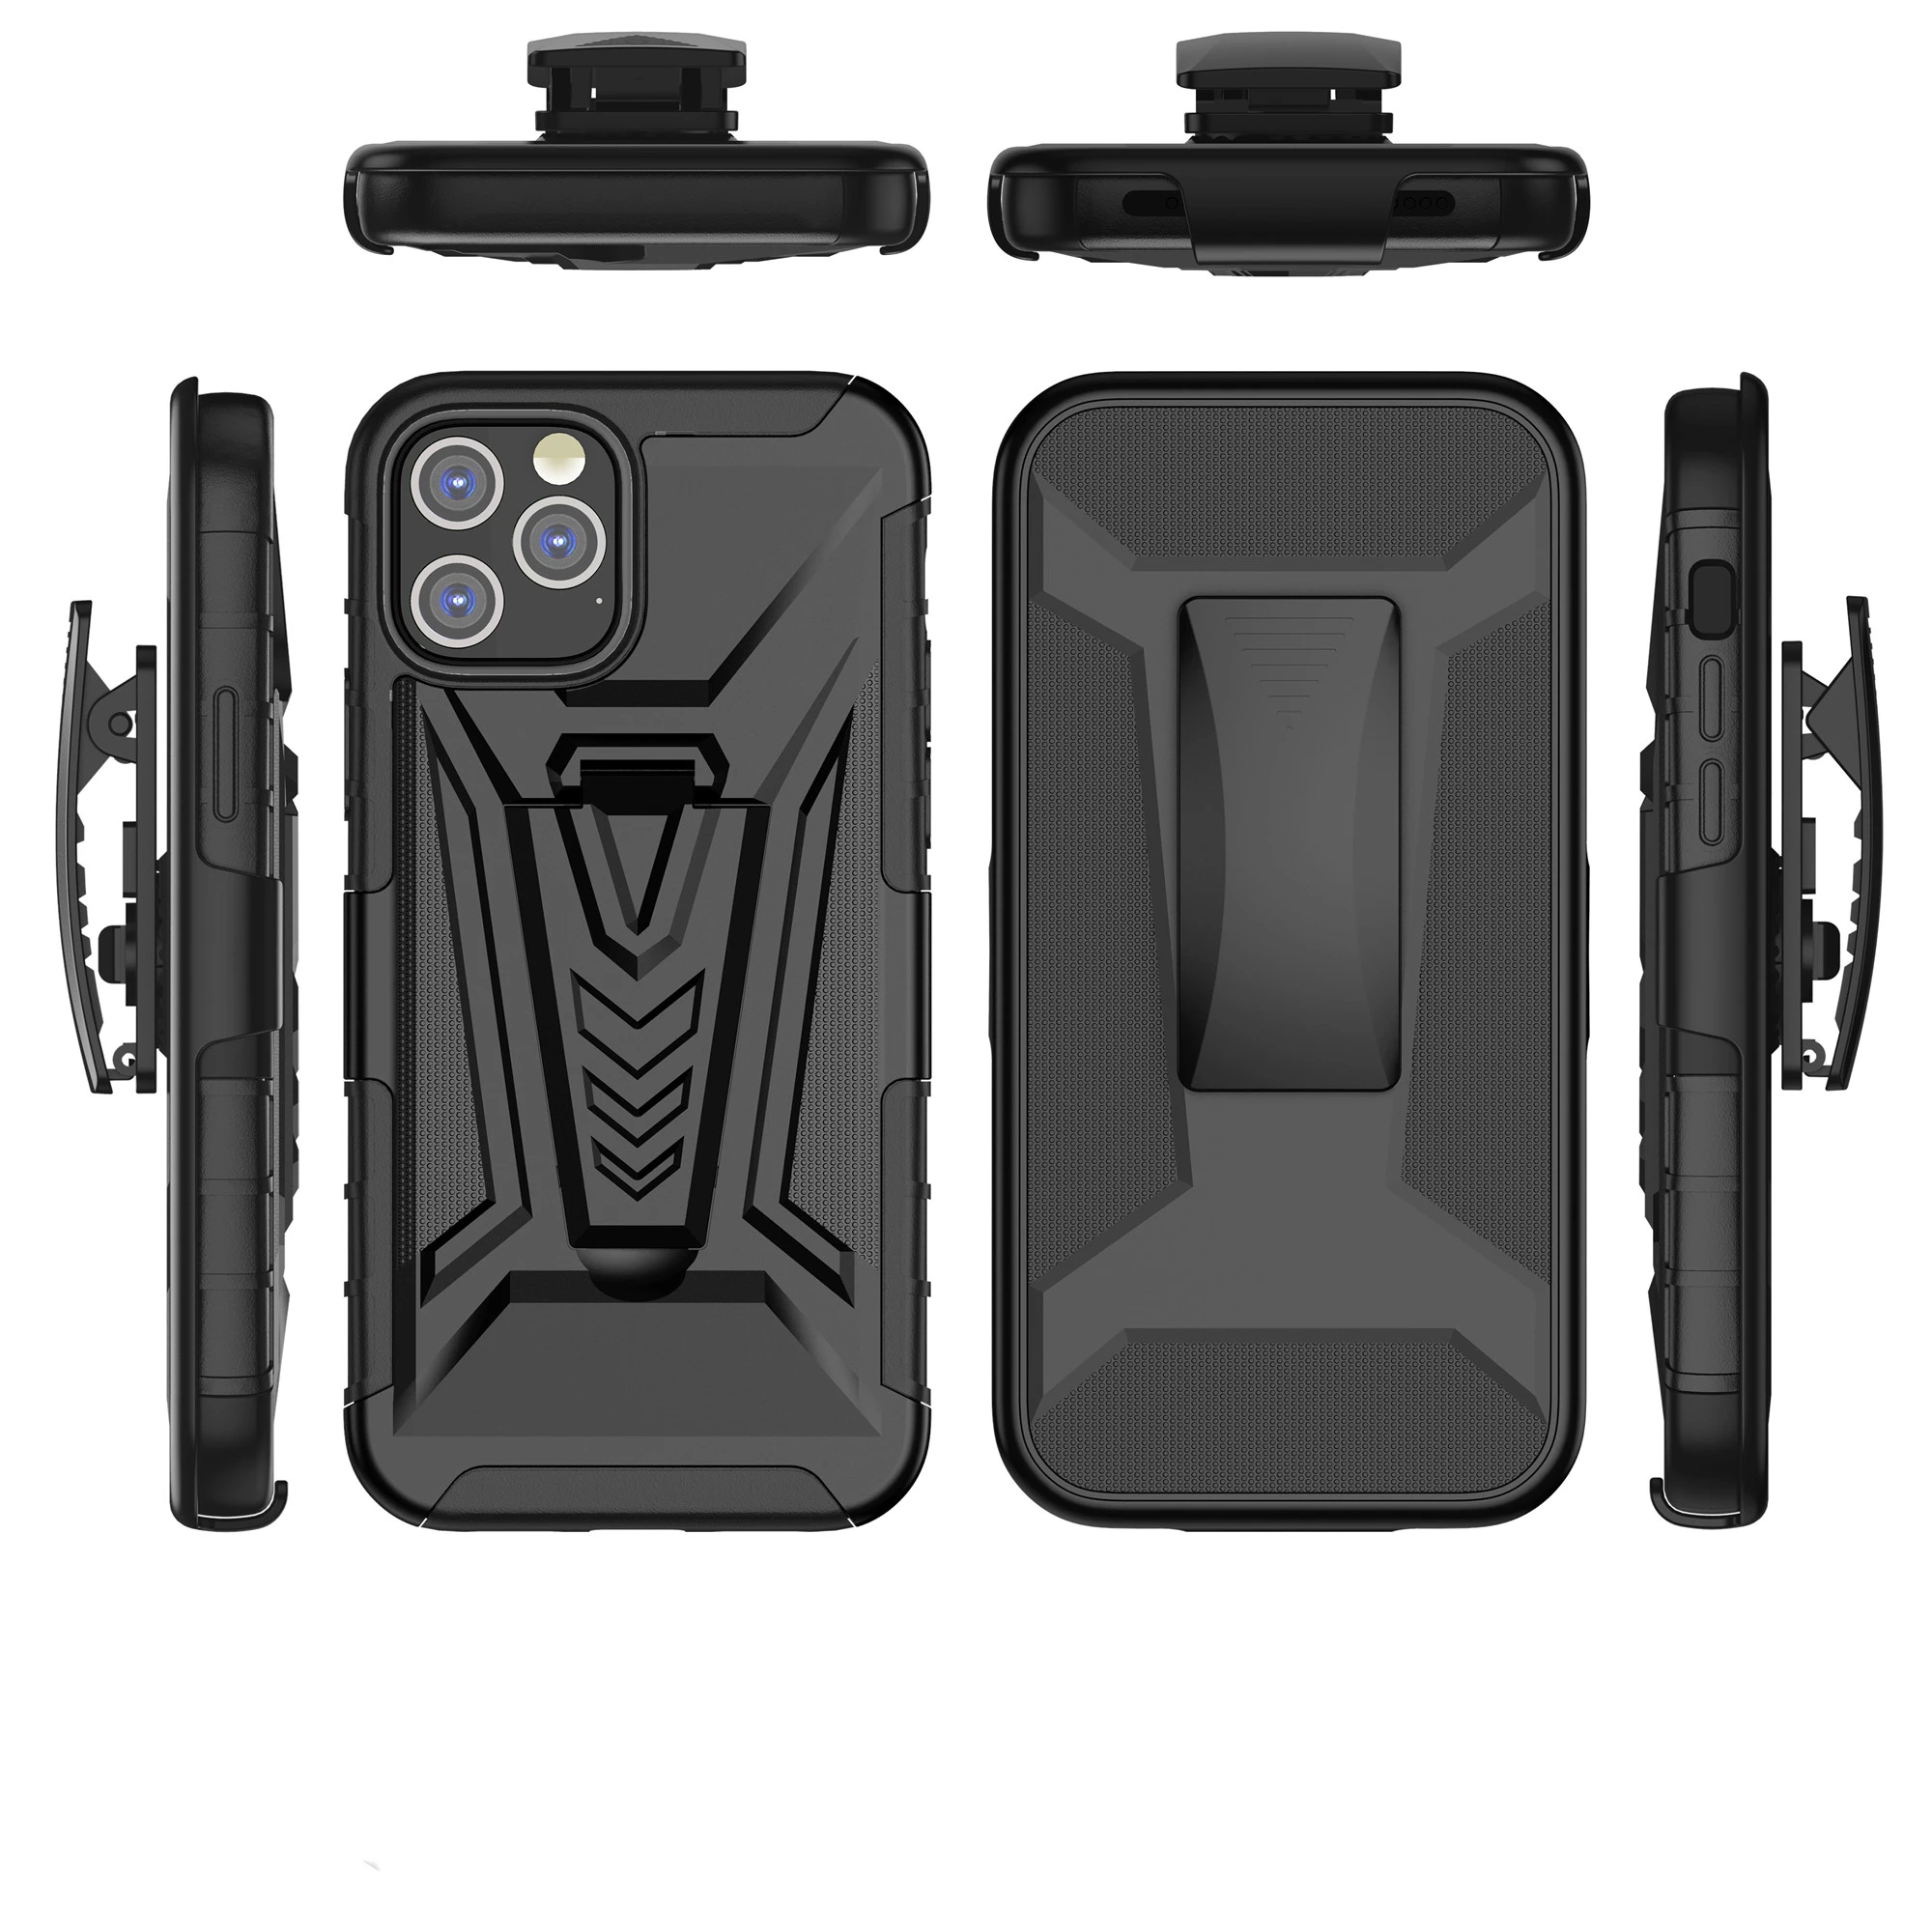 3 in 1 Armor Shockproof Case For iPhone 13 12 mini 11 Pro MAX XS XR 6s 7 8 Plus Cases Belt Clip kickstand Full Protection Cover iphone 13 pro max cover